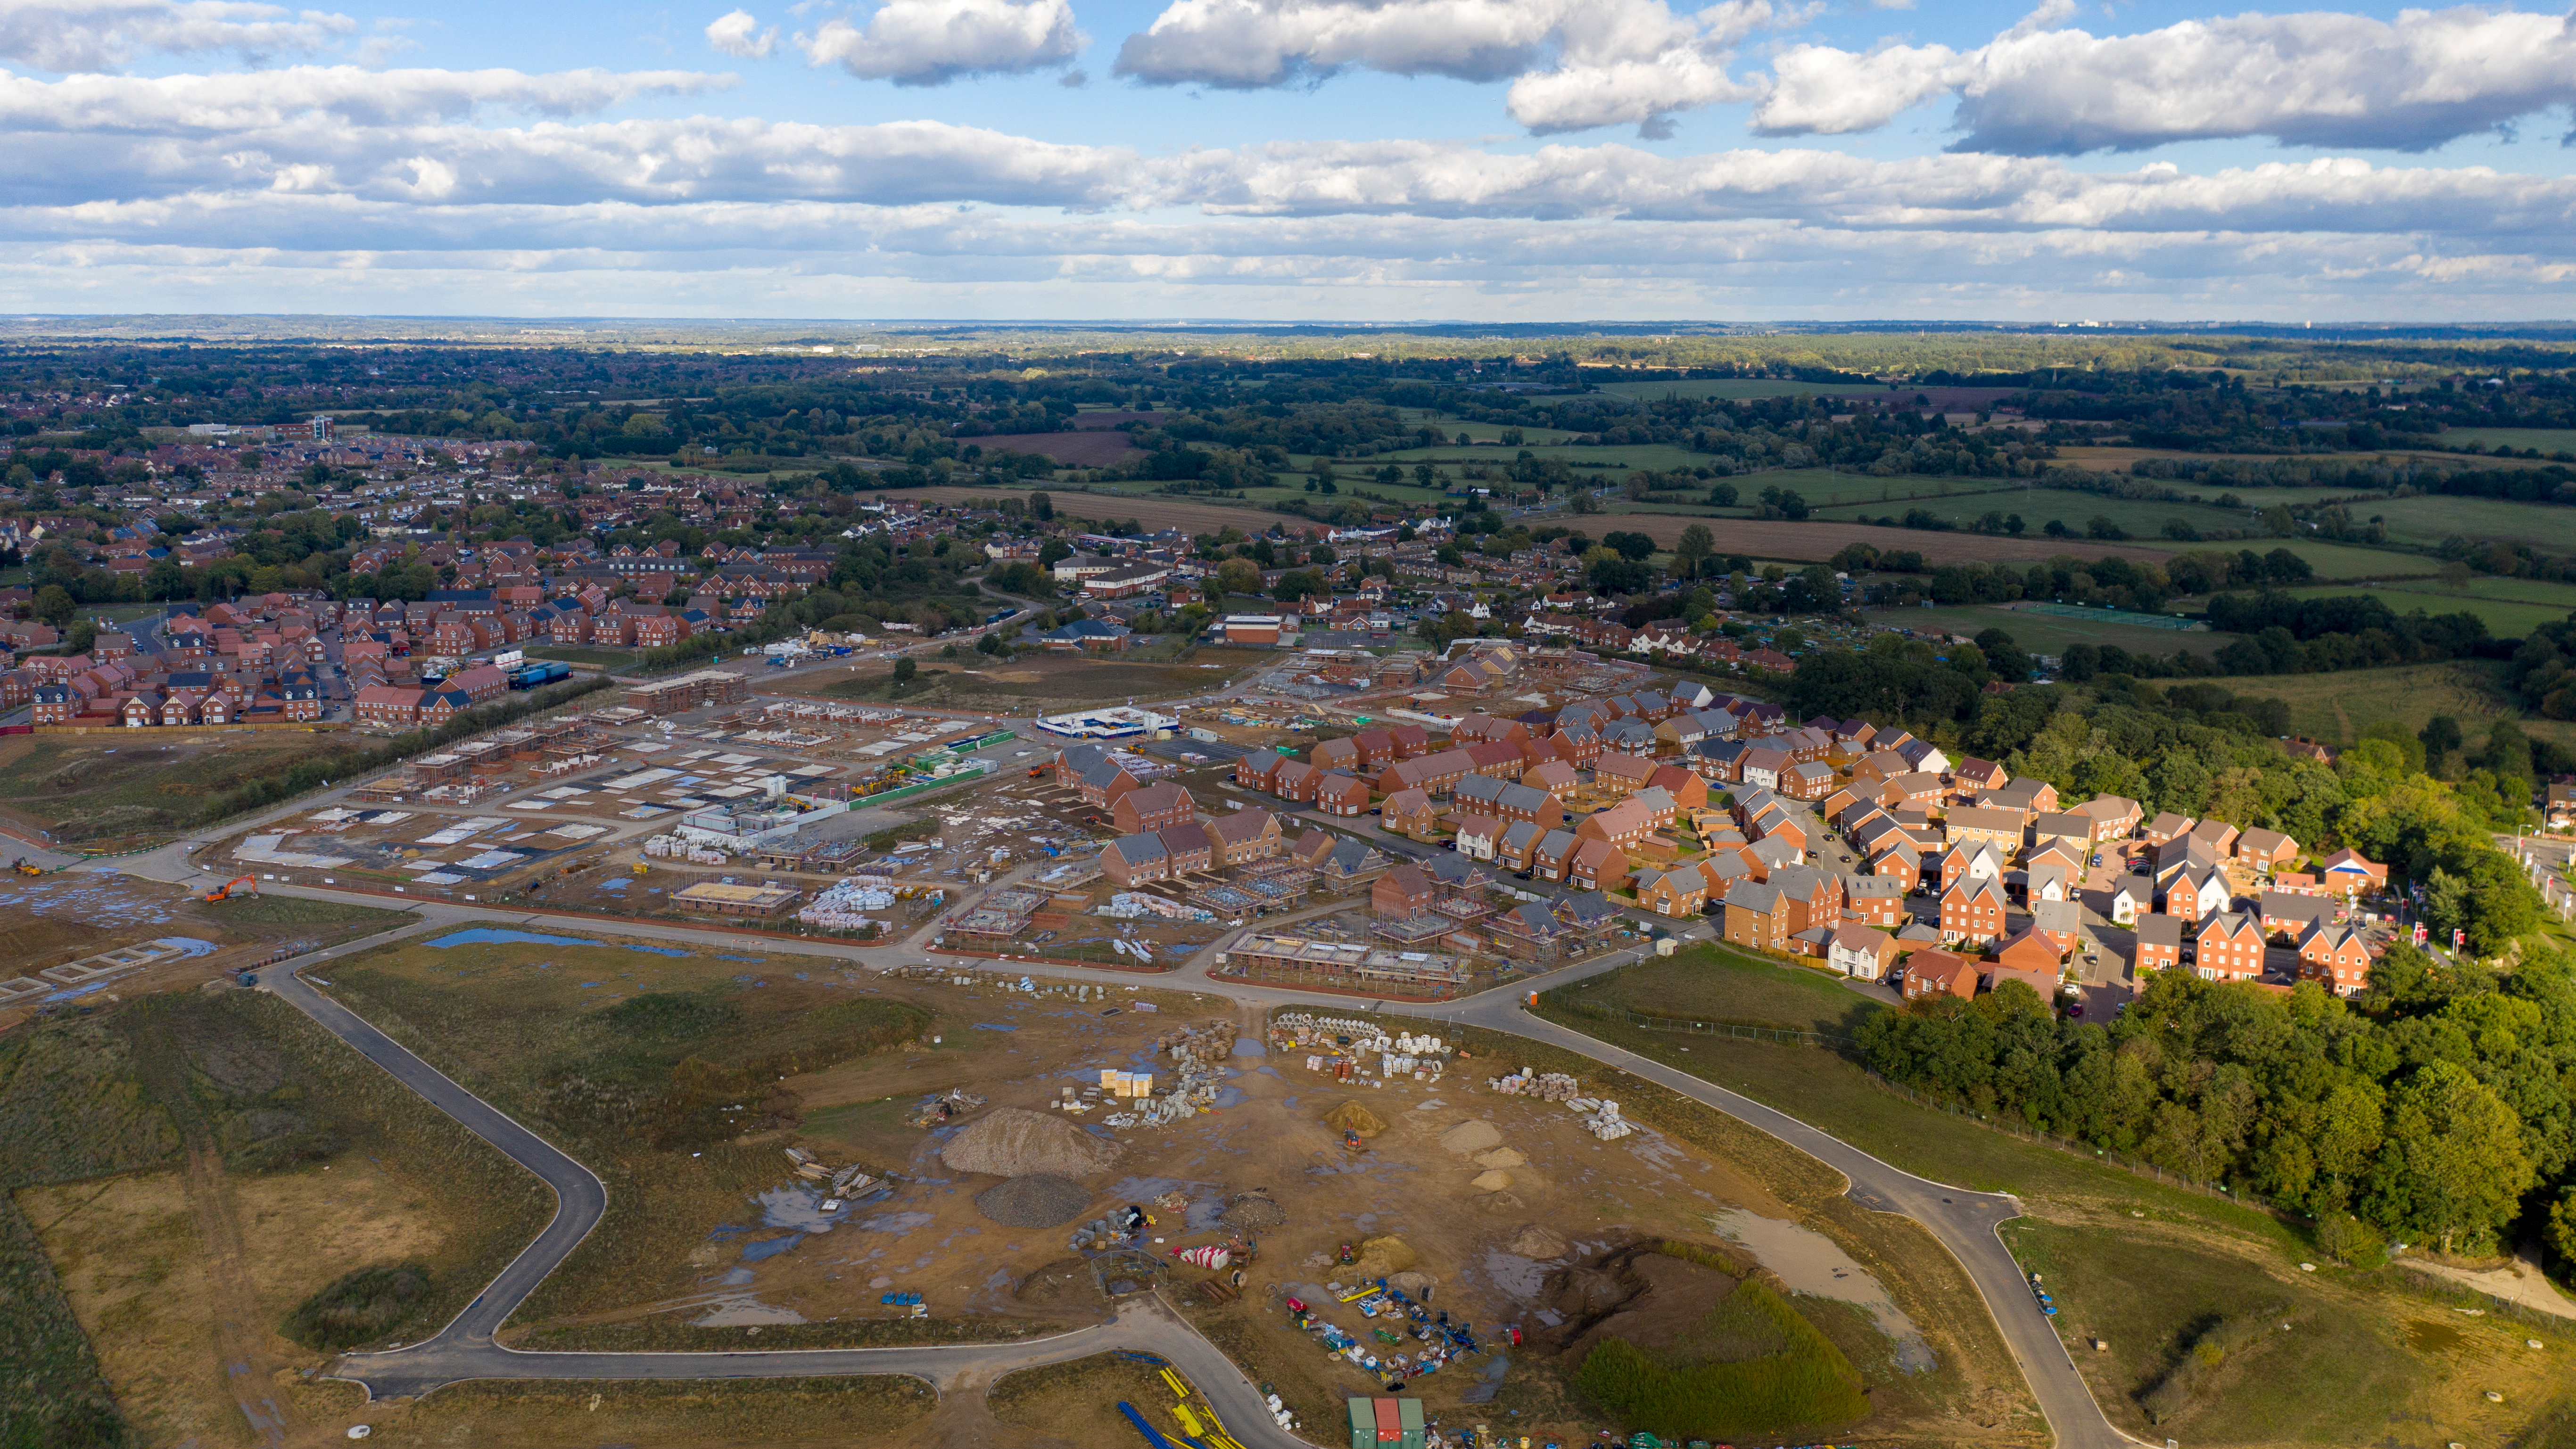 Aerial new housing estate construction on green belt land UK; Shutterstock ID 1199607199; purchase_order: -; job: -; client: -; other: -